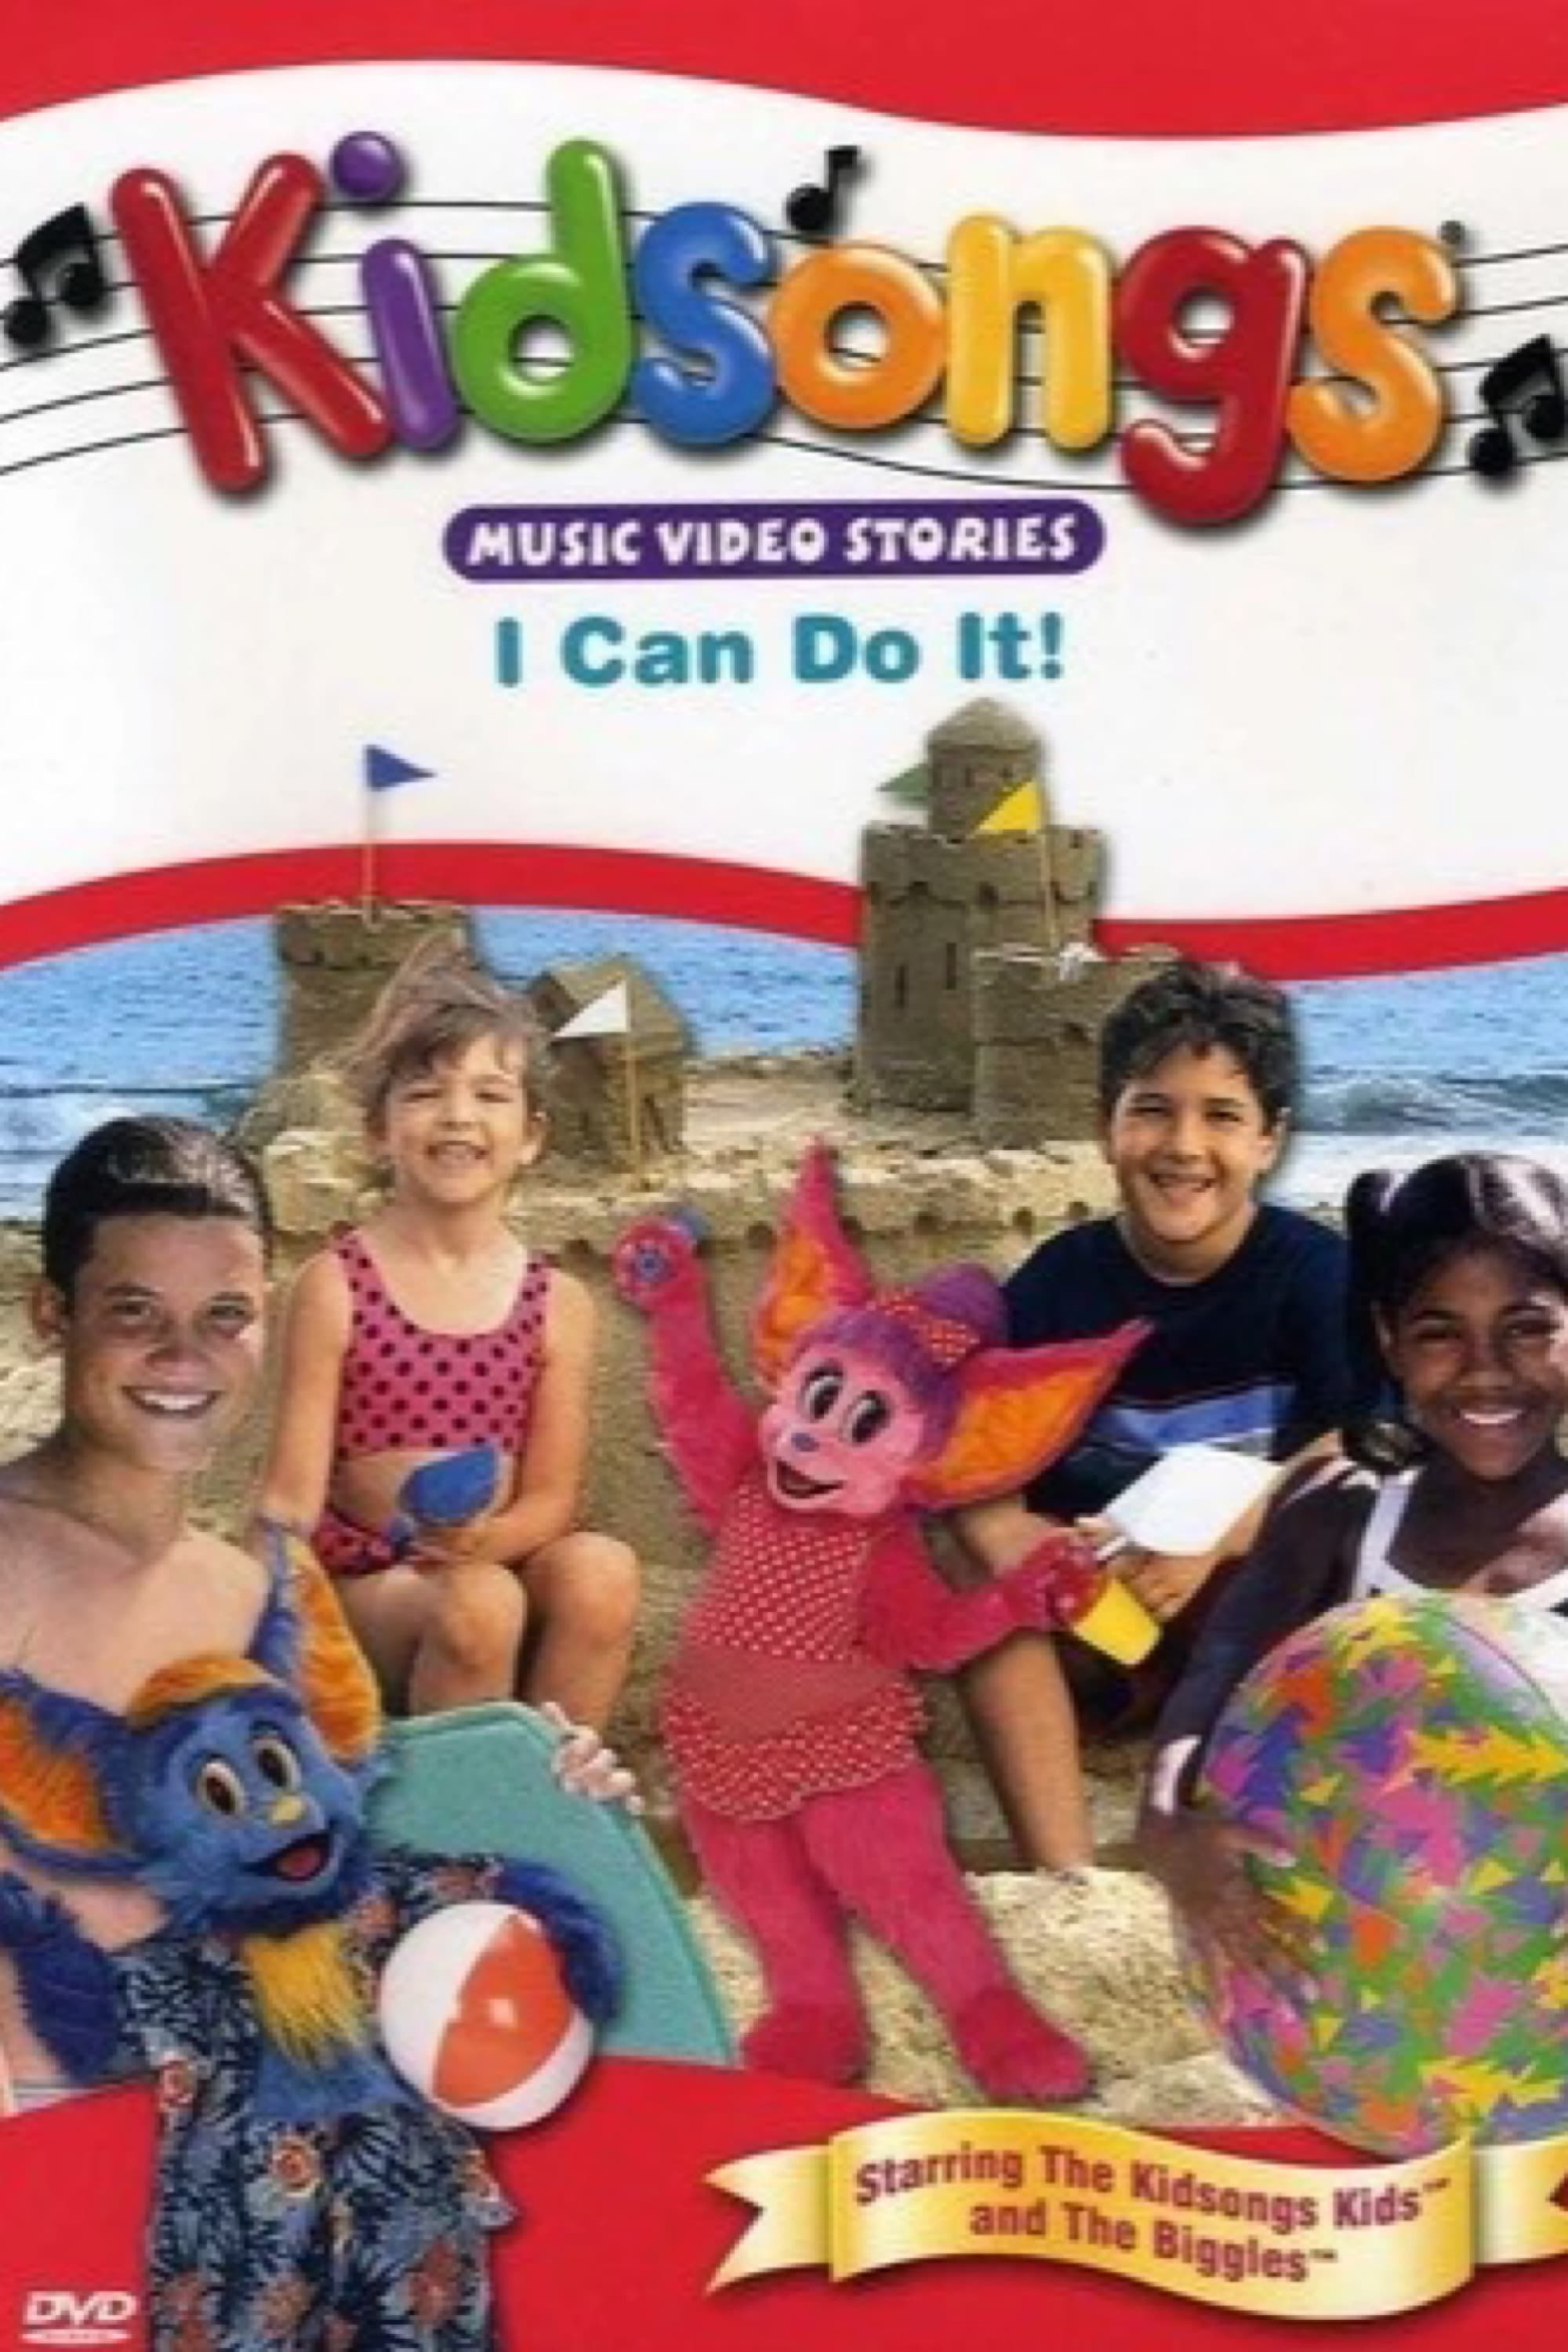 Kidsongs: I Can Do It